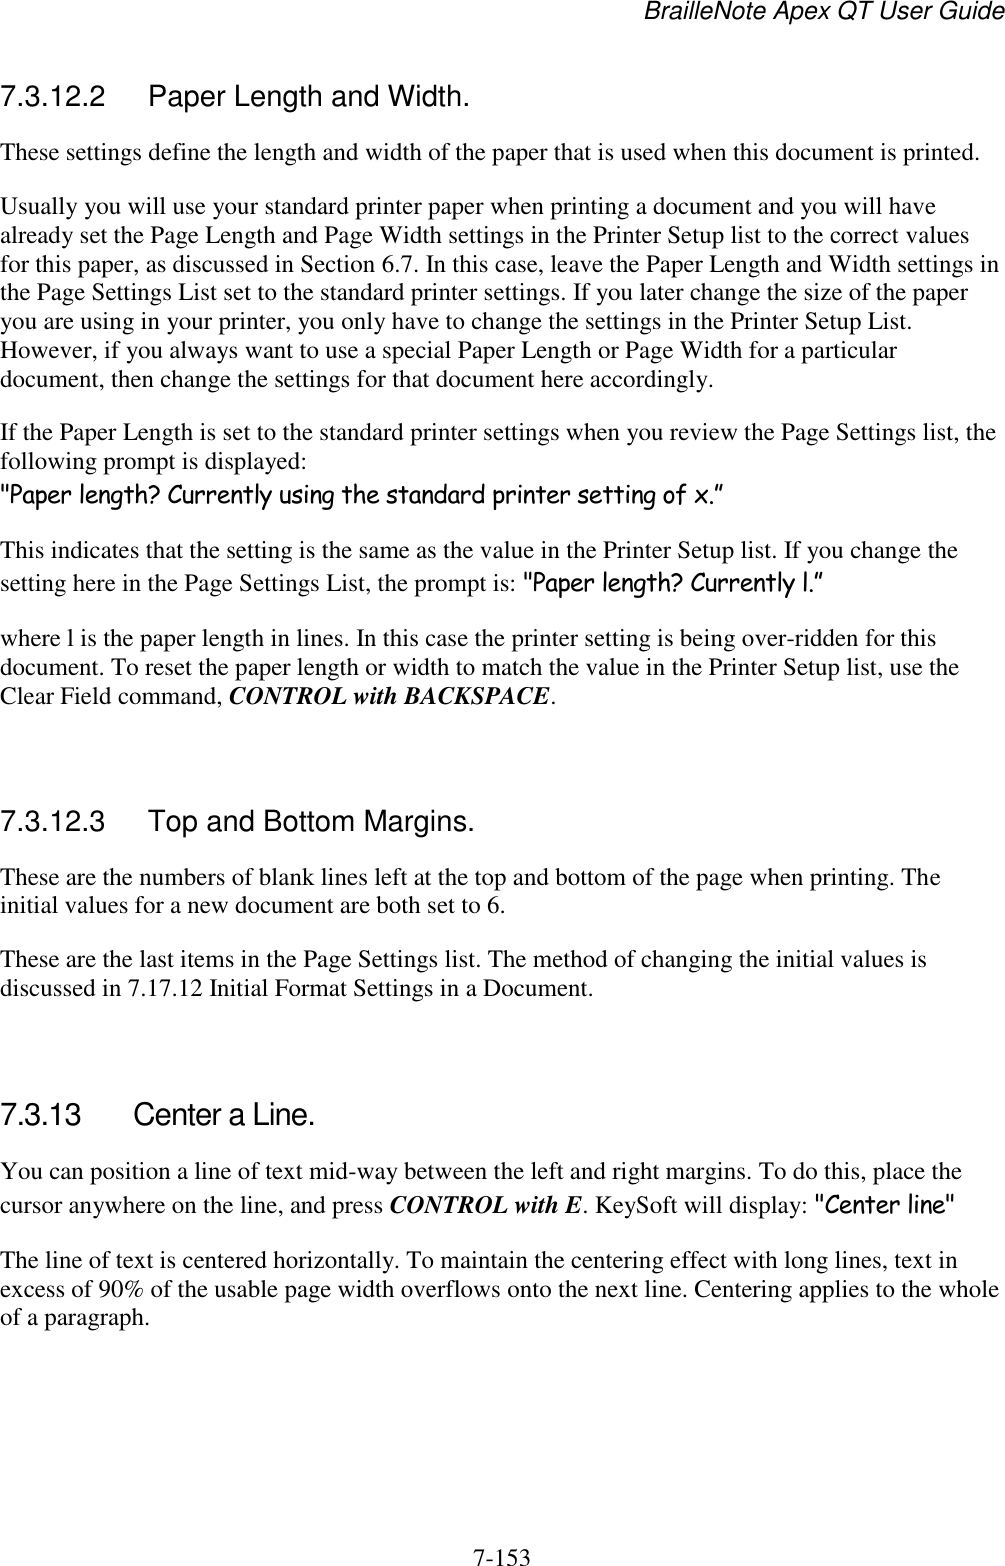 BrailleNote Apex QT User Guide  7-153   7.3.12.2  Paper Length and Width. These settings define the length and width of the paper that is used when this document is printed. Usually you will use your standard printer paper when printing a document and you will have already set the Page Length and Page Width settings in the Printer Setup list to the correct values for this paper, as discussed in Section 6.7. In this case, leave the Paper Length and Width settings in the Page Settings List set to the standard printer settings. If you later change the size of the paper you are using in your printer, you only have to change the settings in the Printer Setup List. However, if you always want to use a special Paper Length or Page Width for a particular document, then change the settings for that document here accordingly. If the Paper Length is set to the standard printer settings when you review the Page Settings list, the following prompt is displayed: &quot;Paper length? Currently using the standard printer setting of x.” This indicates that the setting is the same as the value in the Printer Setup list. If you change the setting here in the Page Settings List, the prompt is: &quot;Paper length? Currently l.” where l is the paper length in lines. In this case the printer setting is being over-ridden for this document. To reset the paper length or width to match the value in the Printer Setup list, use the Clear Field command, CONTROL with BACKSPACE.   7.3.12.3  Top and Bottom Margins. These are the numbers of blank lines left at the top and bottom of the page when printing. The initial values for a new document are both set to 6. These are the last items in the Page Settings list. The method of changing the initial values is discussed in 7.17.12 Initial Format Settings in a Document.   7.3.13  Center a Line. You can position a line of text mid-way between the left and right margins. To do this, place the cursor anywhere on the line, and press CONTROL with E. KeySoft will display: &quot;Center line&quot; The line of text is centered horizontally. To maintain the centering effect with long lines, text in excess of 90% of the usable page width overflows onto the next line. Centering applies to the whole of a paragraph.    